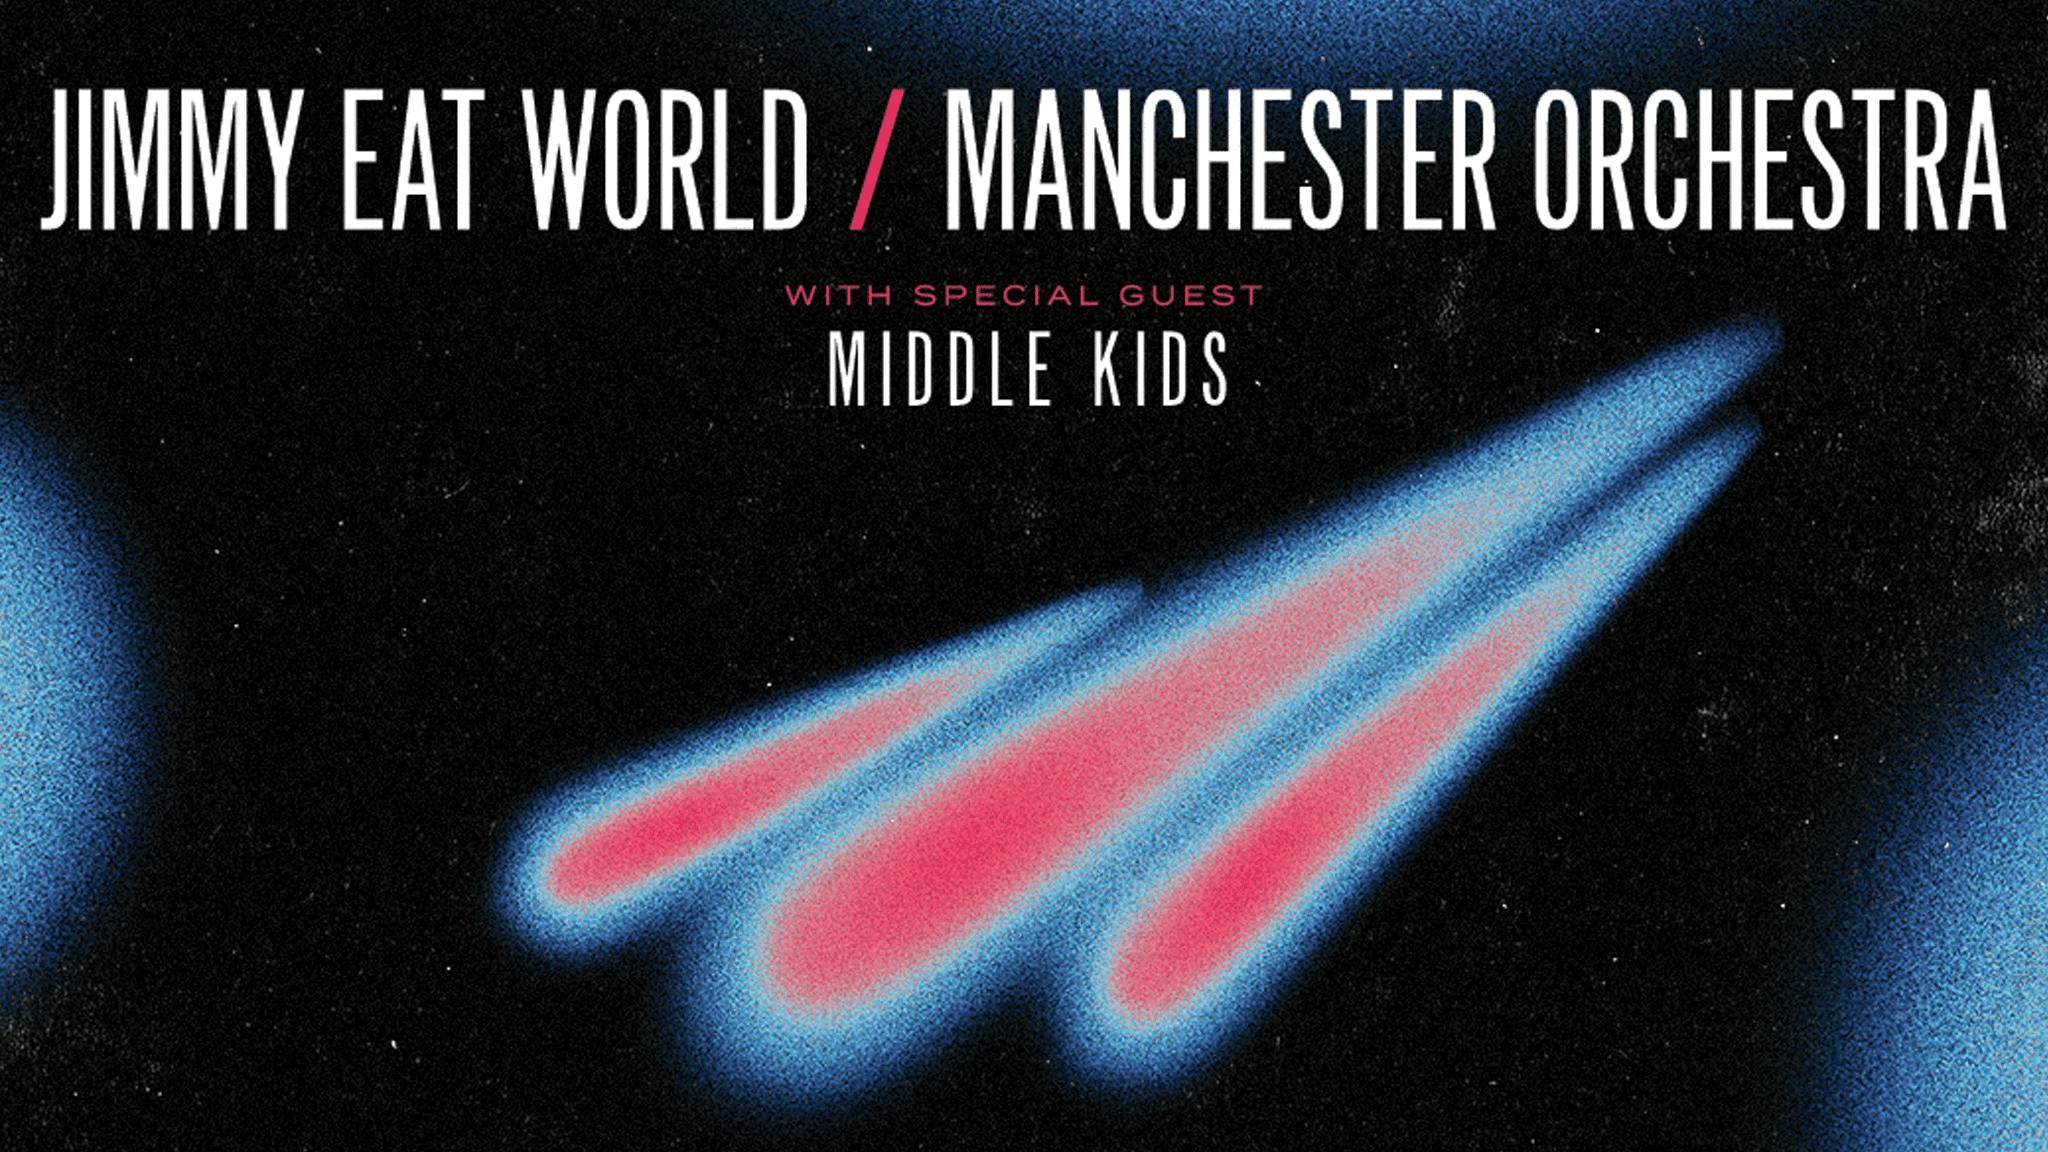 Jimmy Eat World and Manchester Orchestra announce co-headline tour